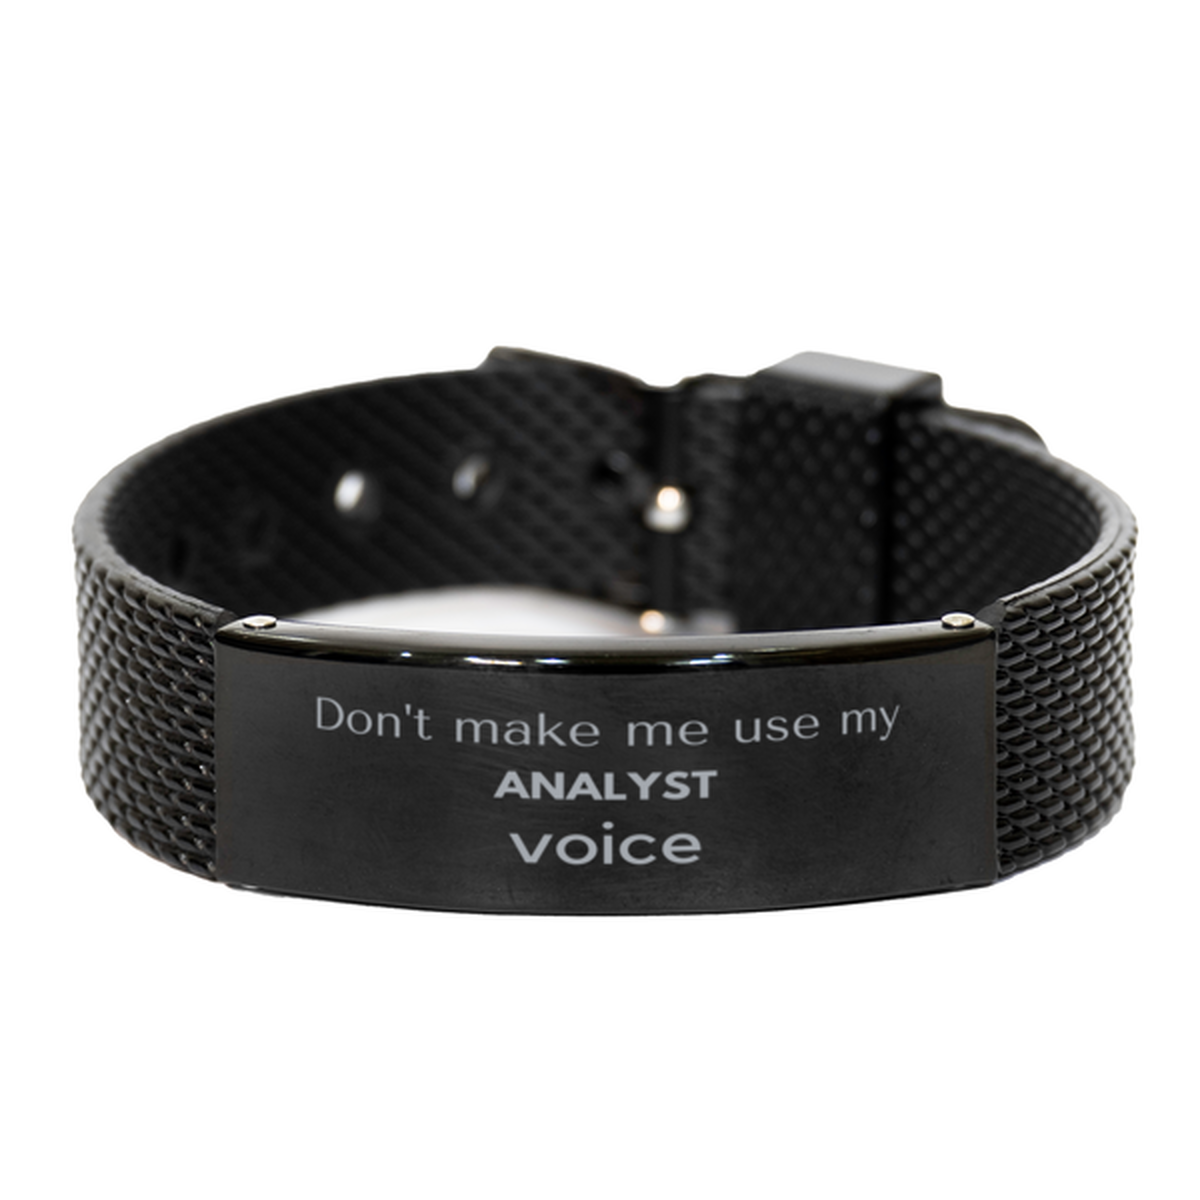 Don't make me use my Analyst voice, Sarcasm Analyst Gifts, Christmas Analyst Black Shark Mesh Bracelet Birthday Unique Gifts For Analyst Coworkers, Men, Women, Colleague, Friends